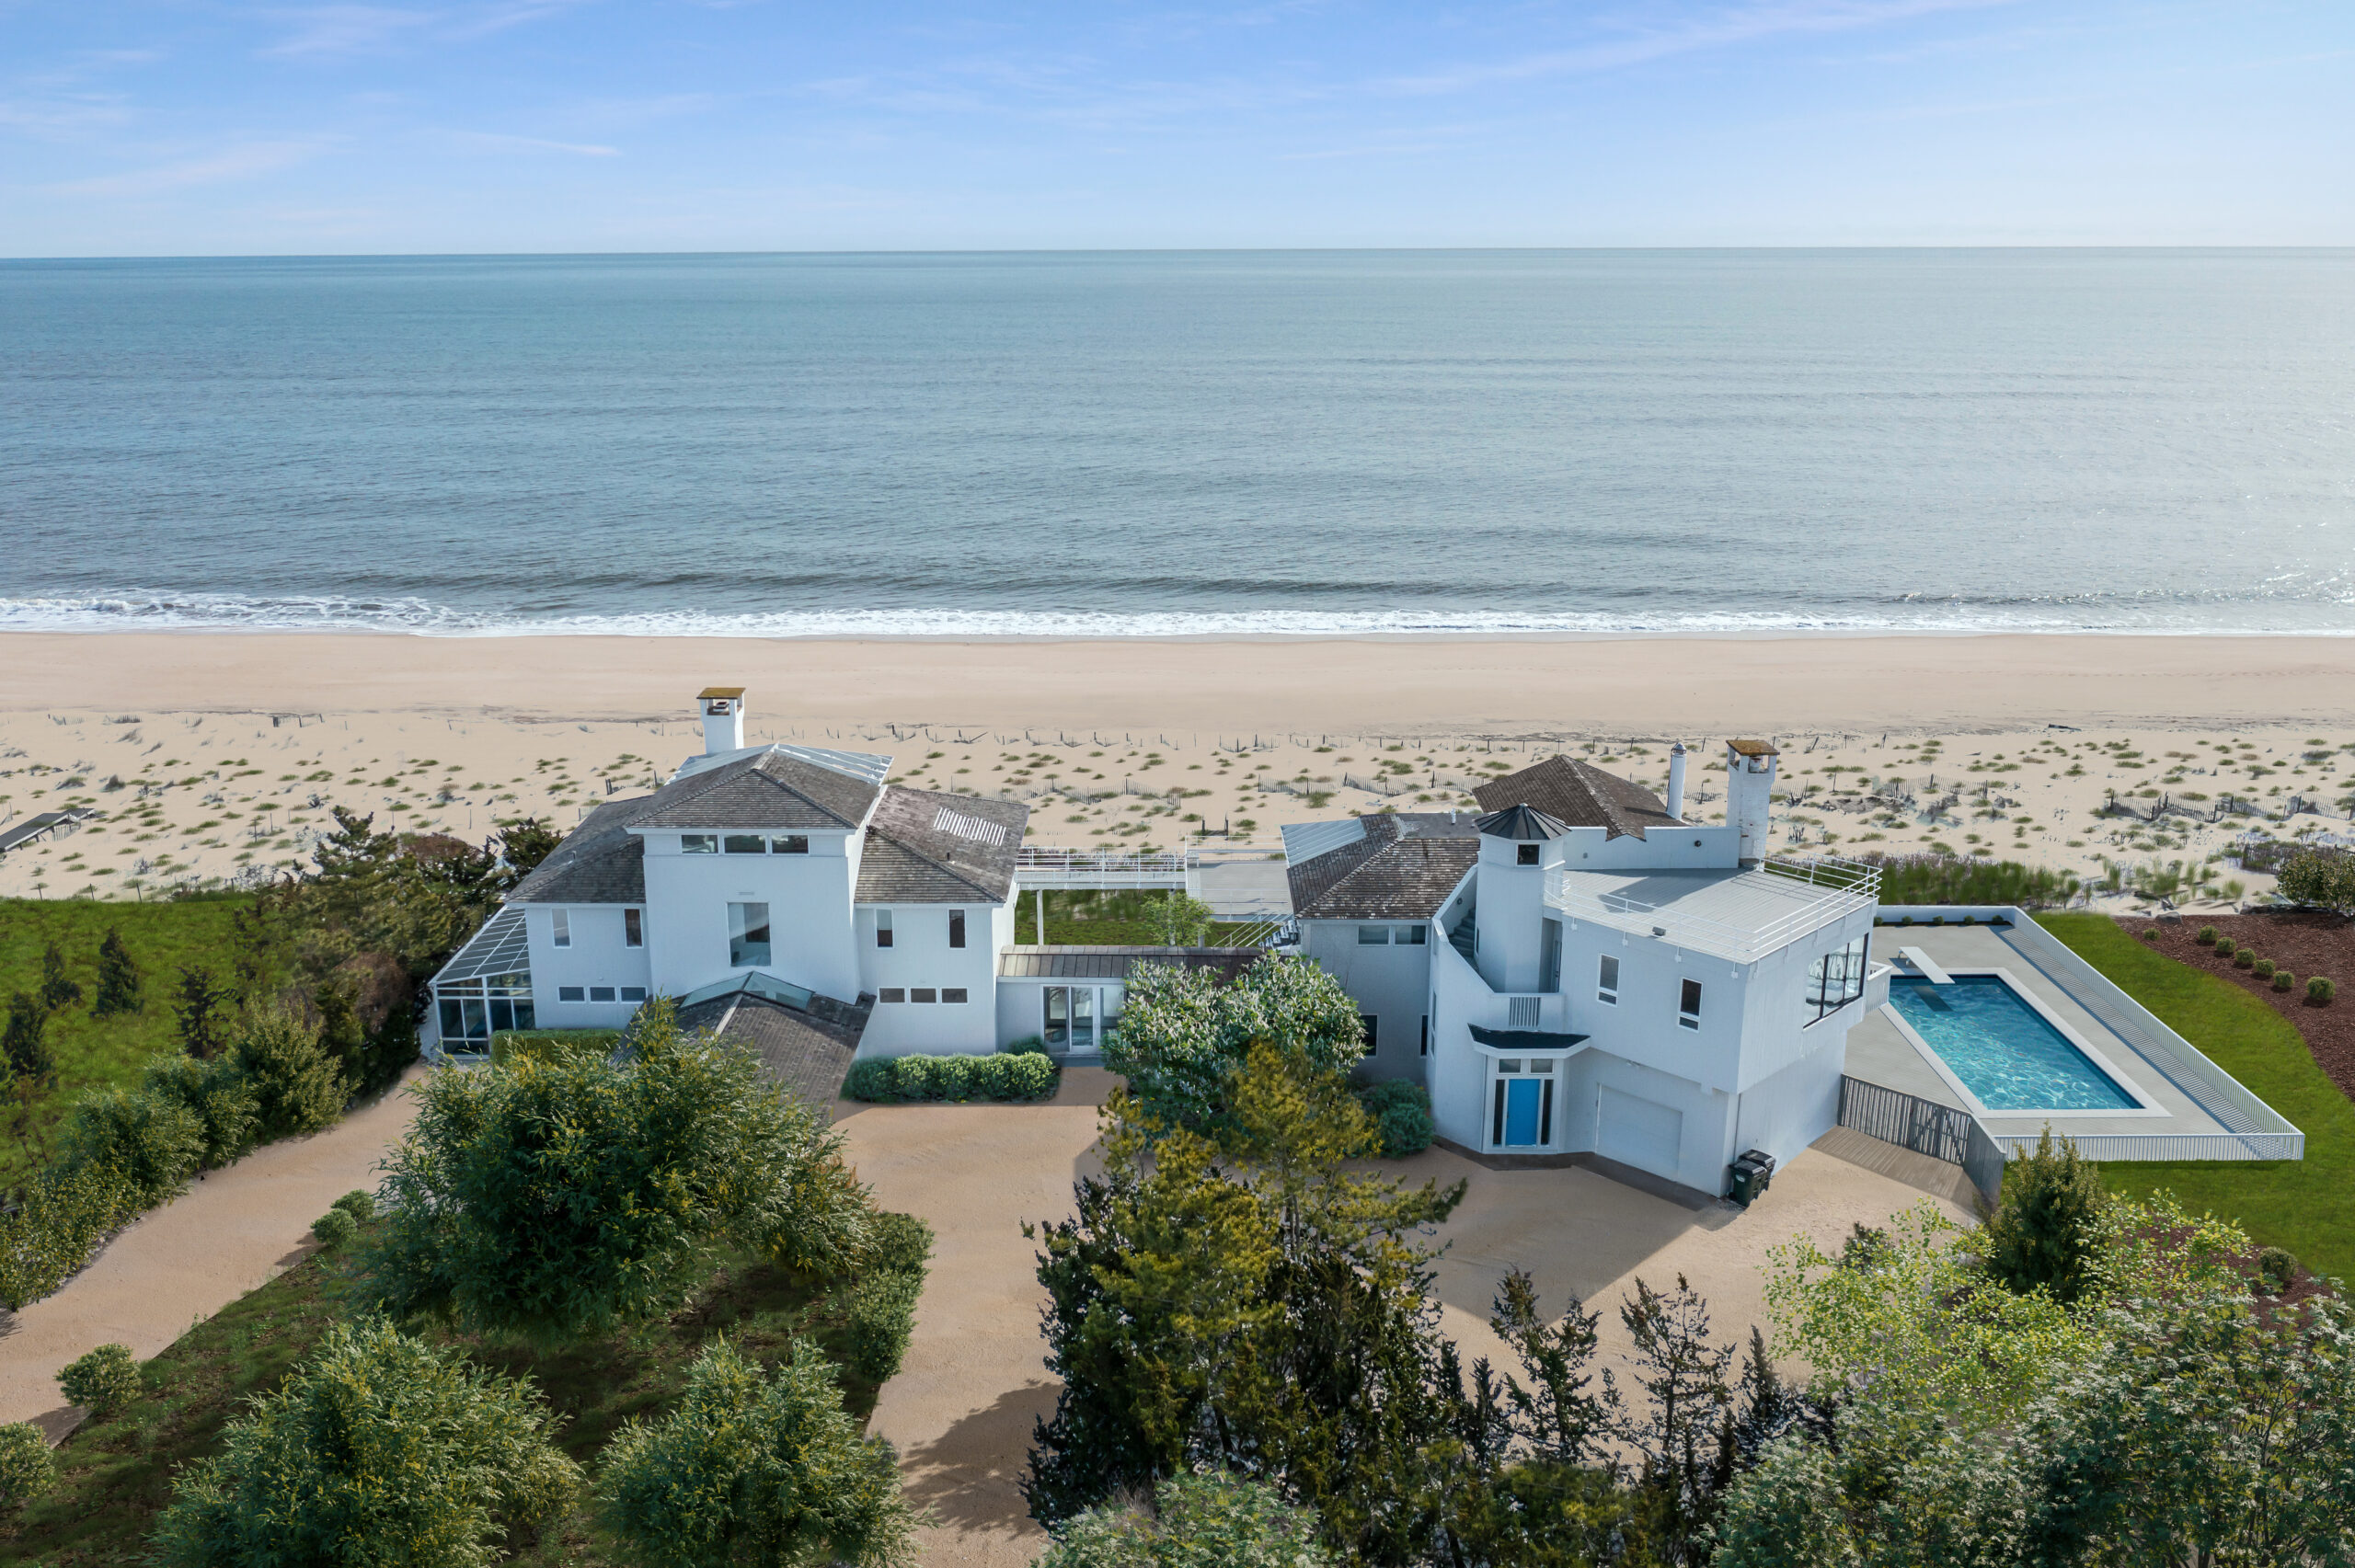 35 Potato Lane in Sagaponack recently sold in a package with 543 Daniels Lane for $46.5 million.  COURTESY COMPASS